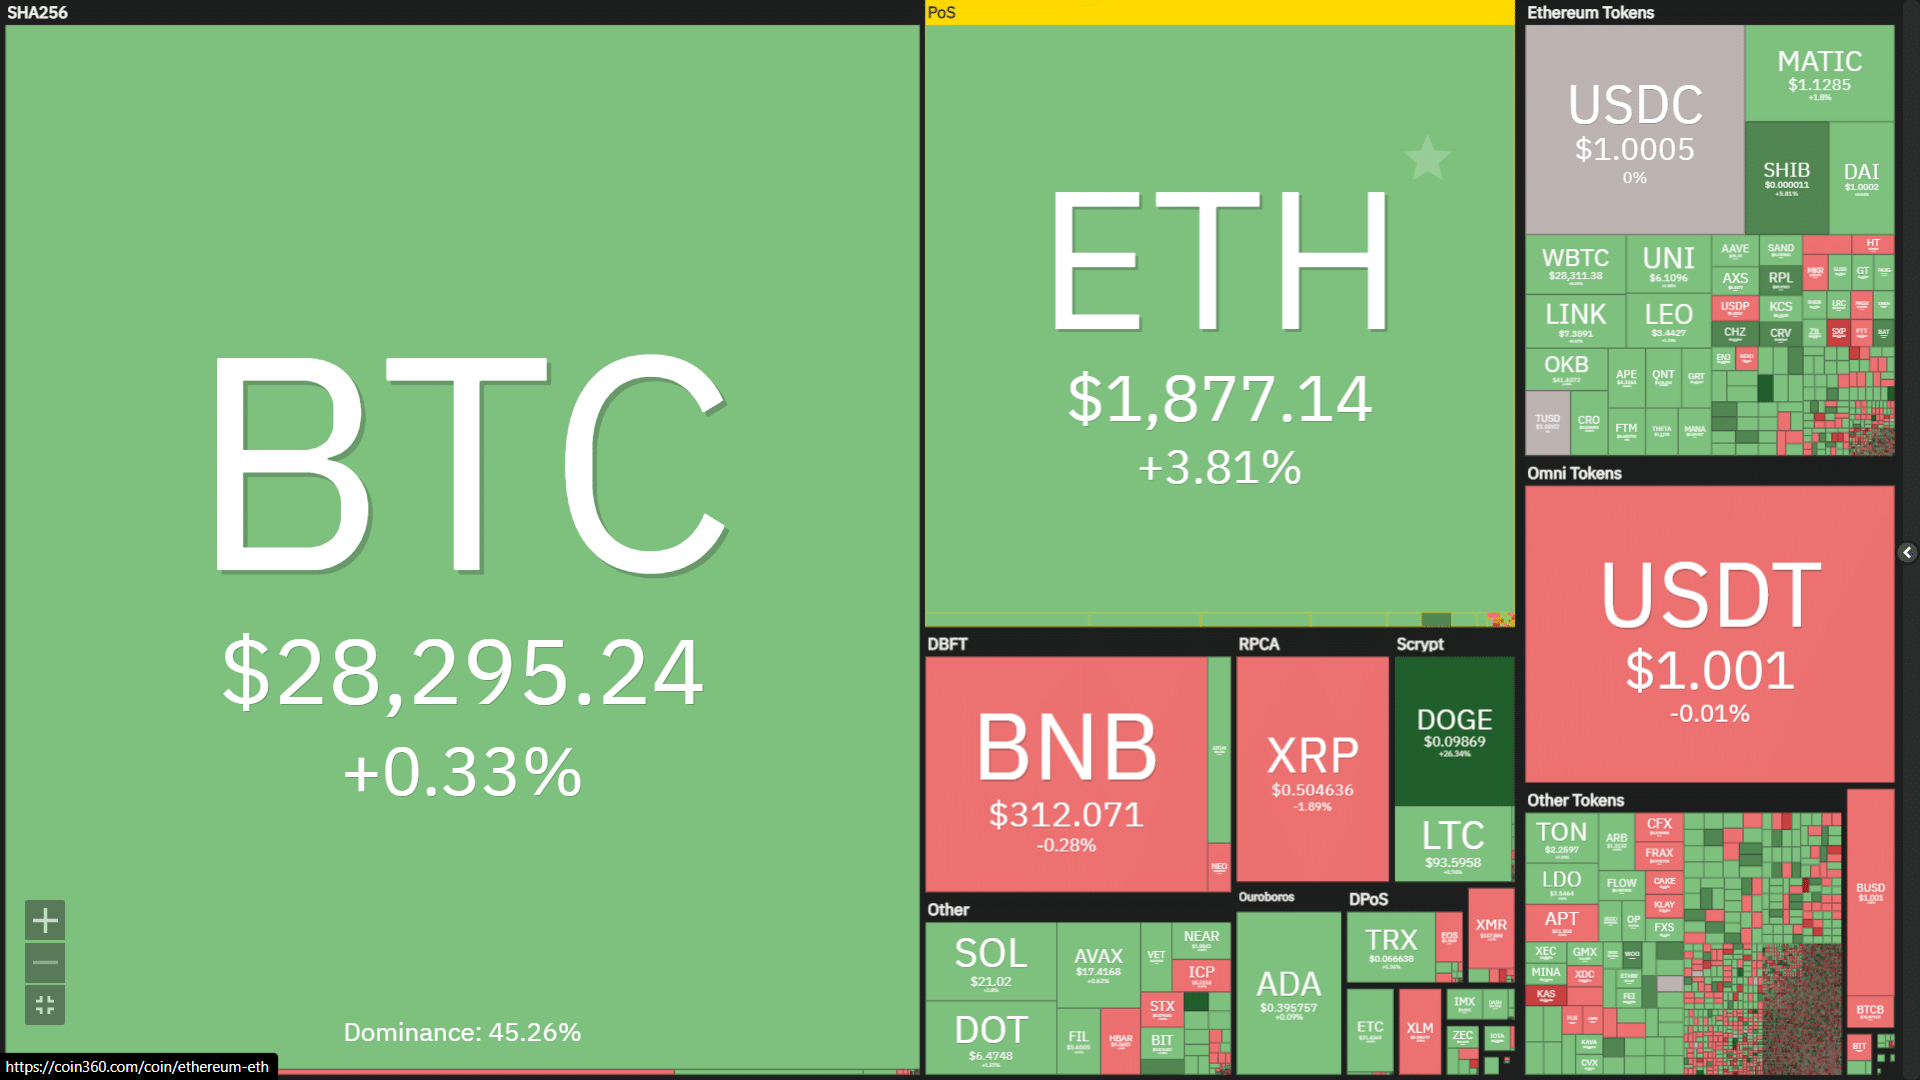  heatmap of cryptocurrency prices